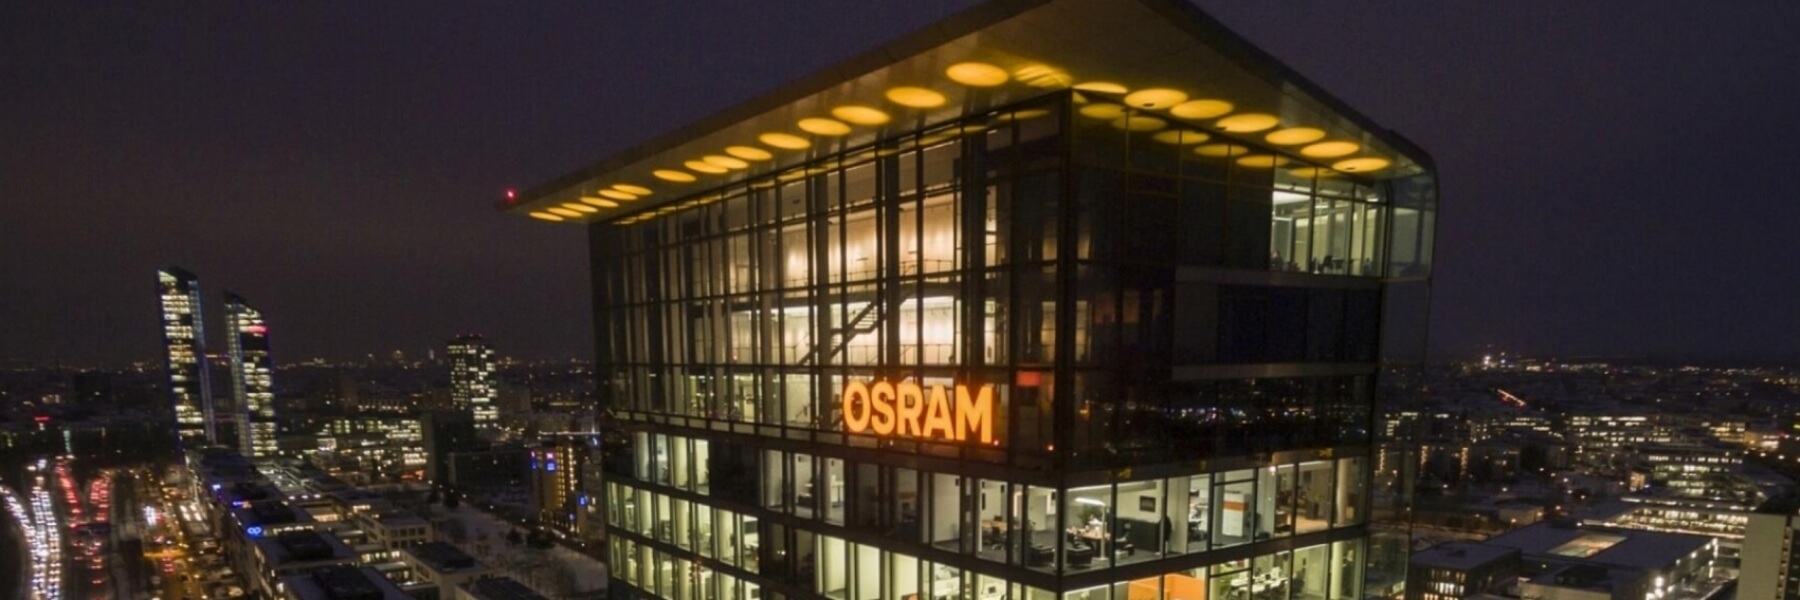 Let's Turn Your Designs into Reality Instantly with OSRAM Digital Systems.